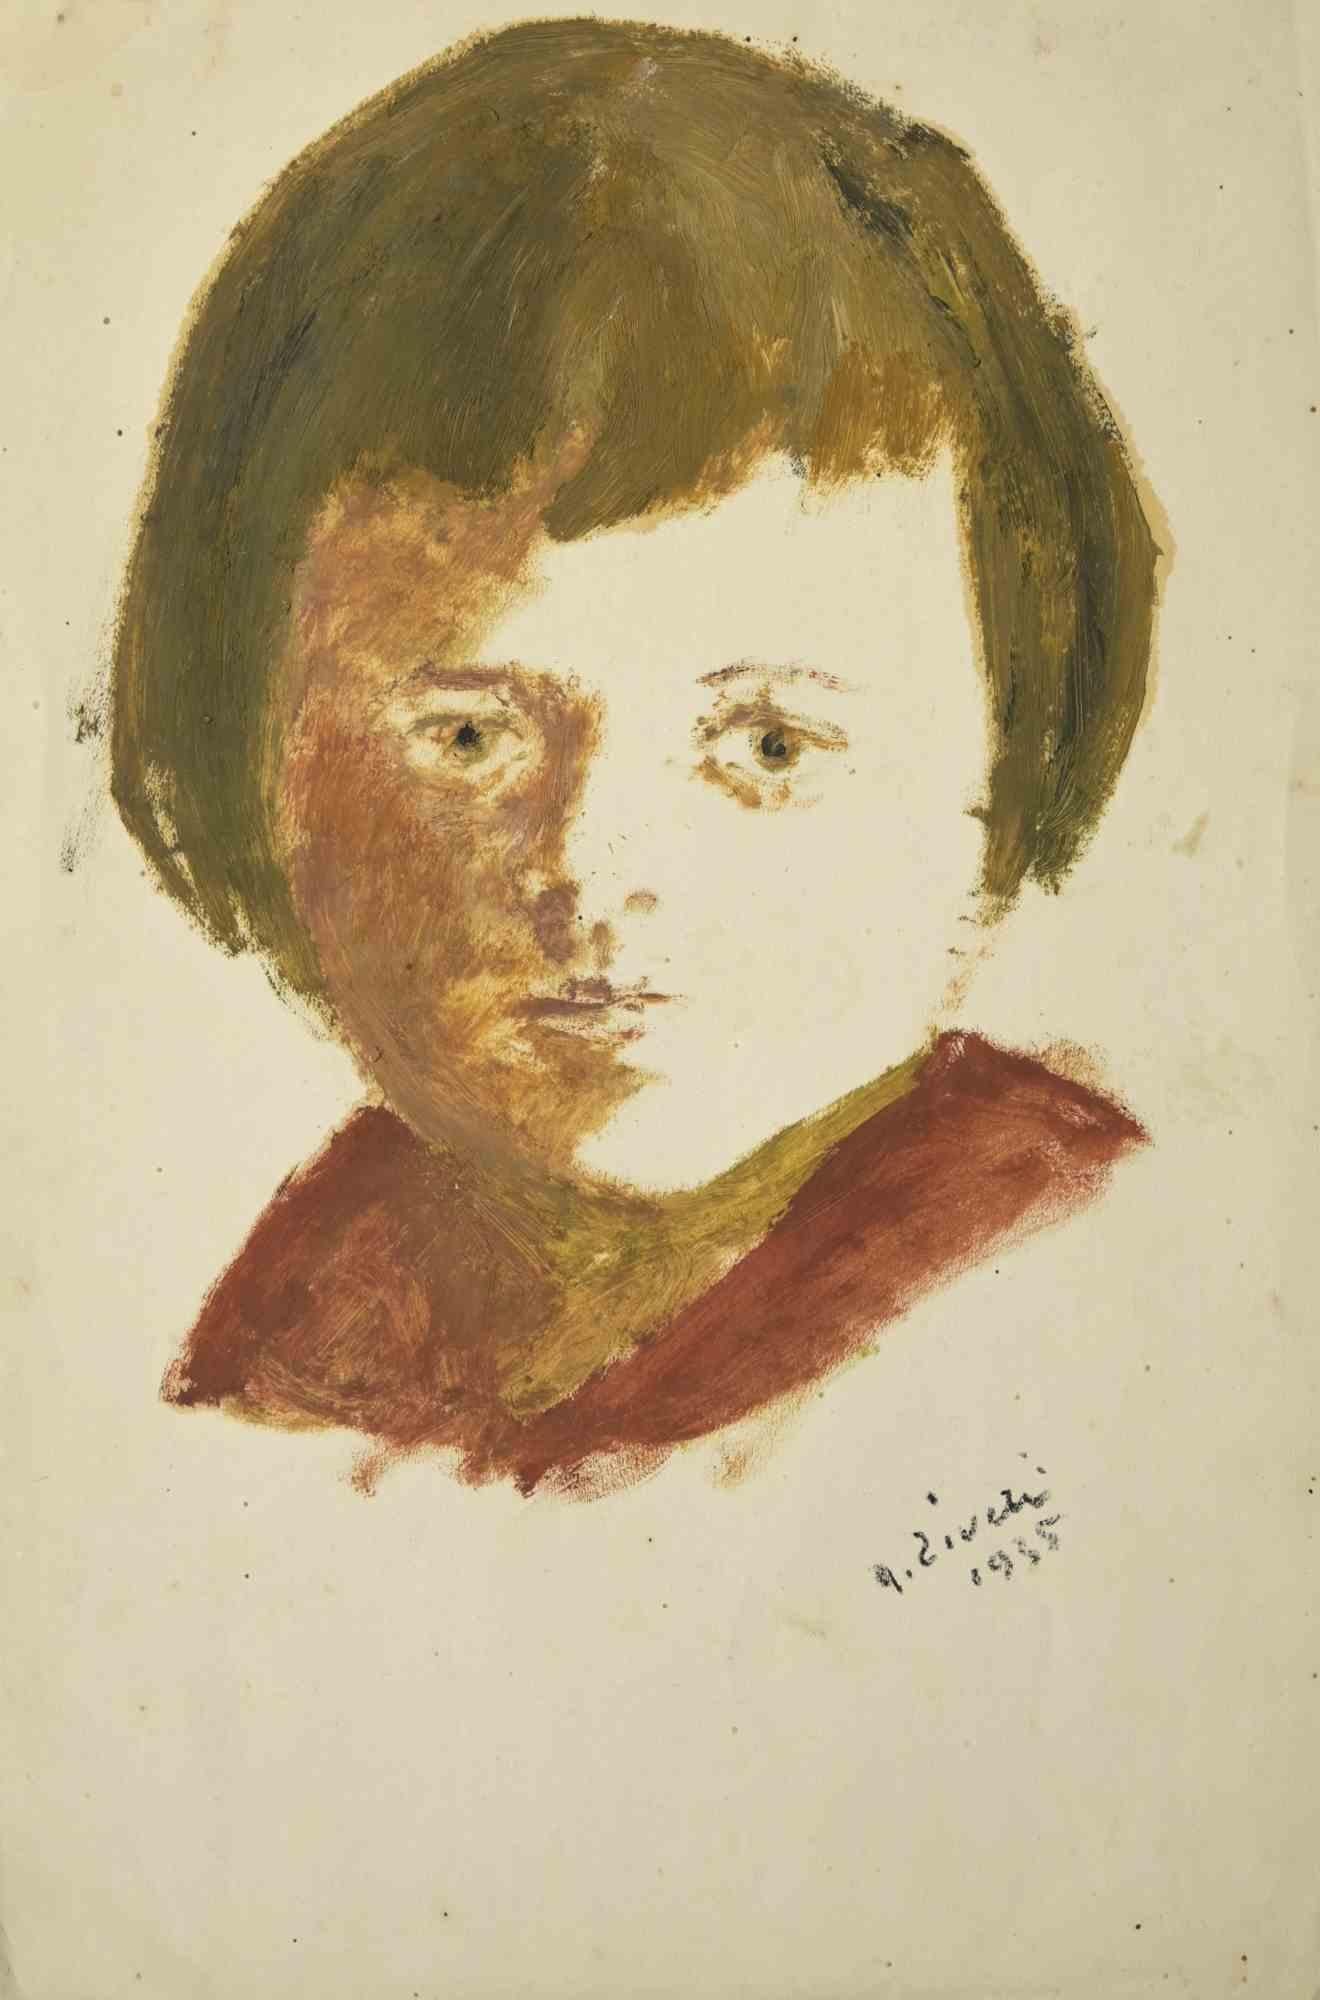 The Child's Portrait - Drawing by Alberto Ziveri - 1935